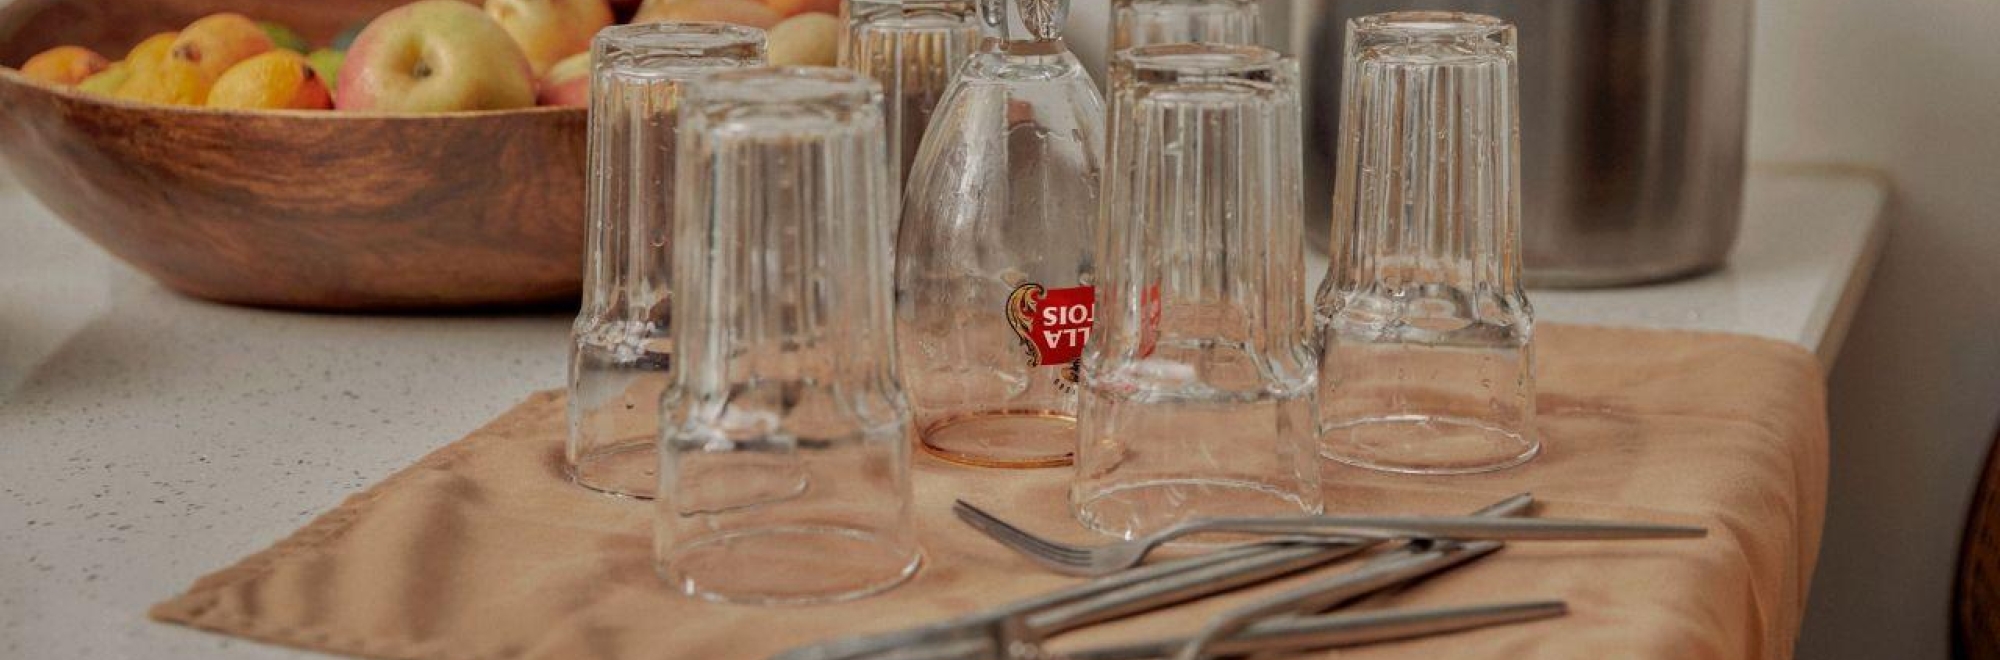 Steal Artois Collection: Stella Artois embraces the sin few will admit